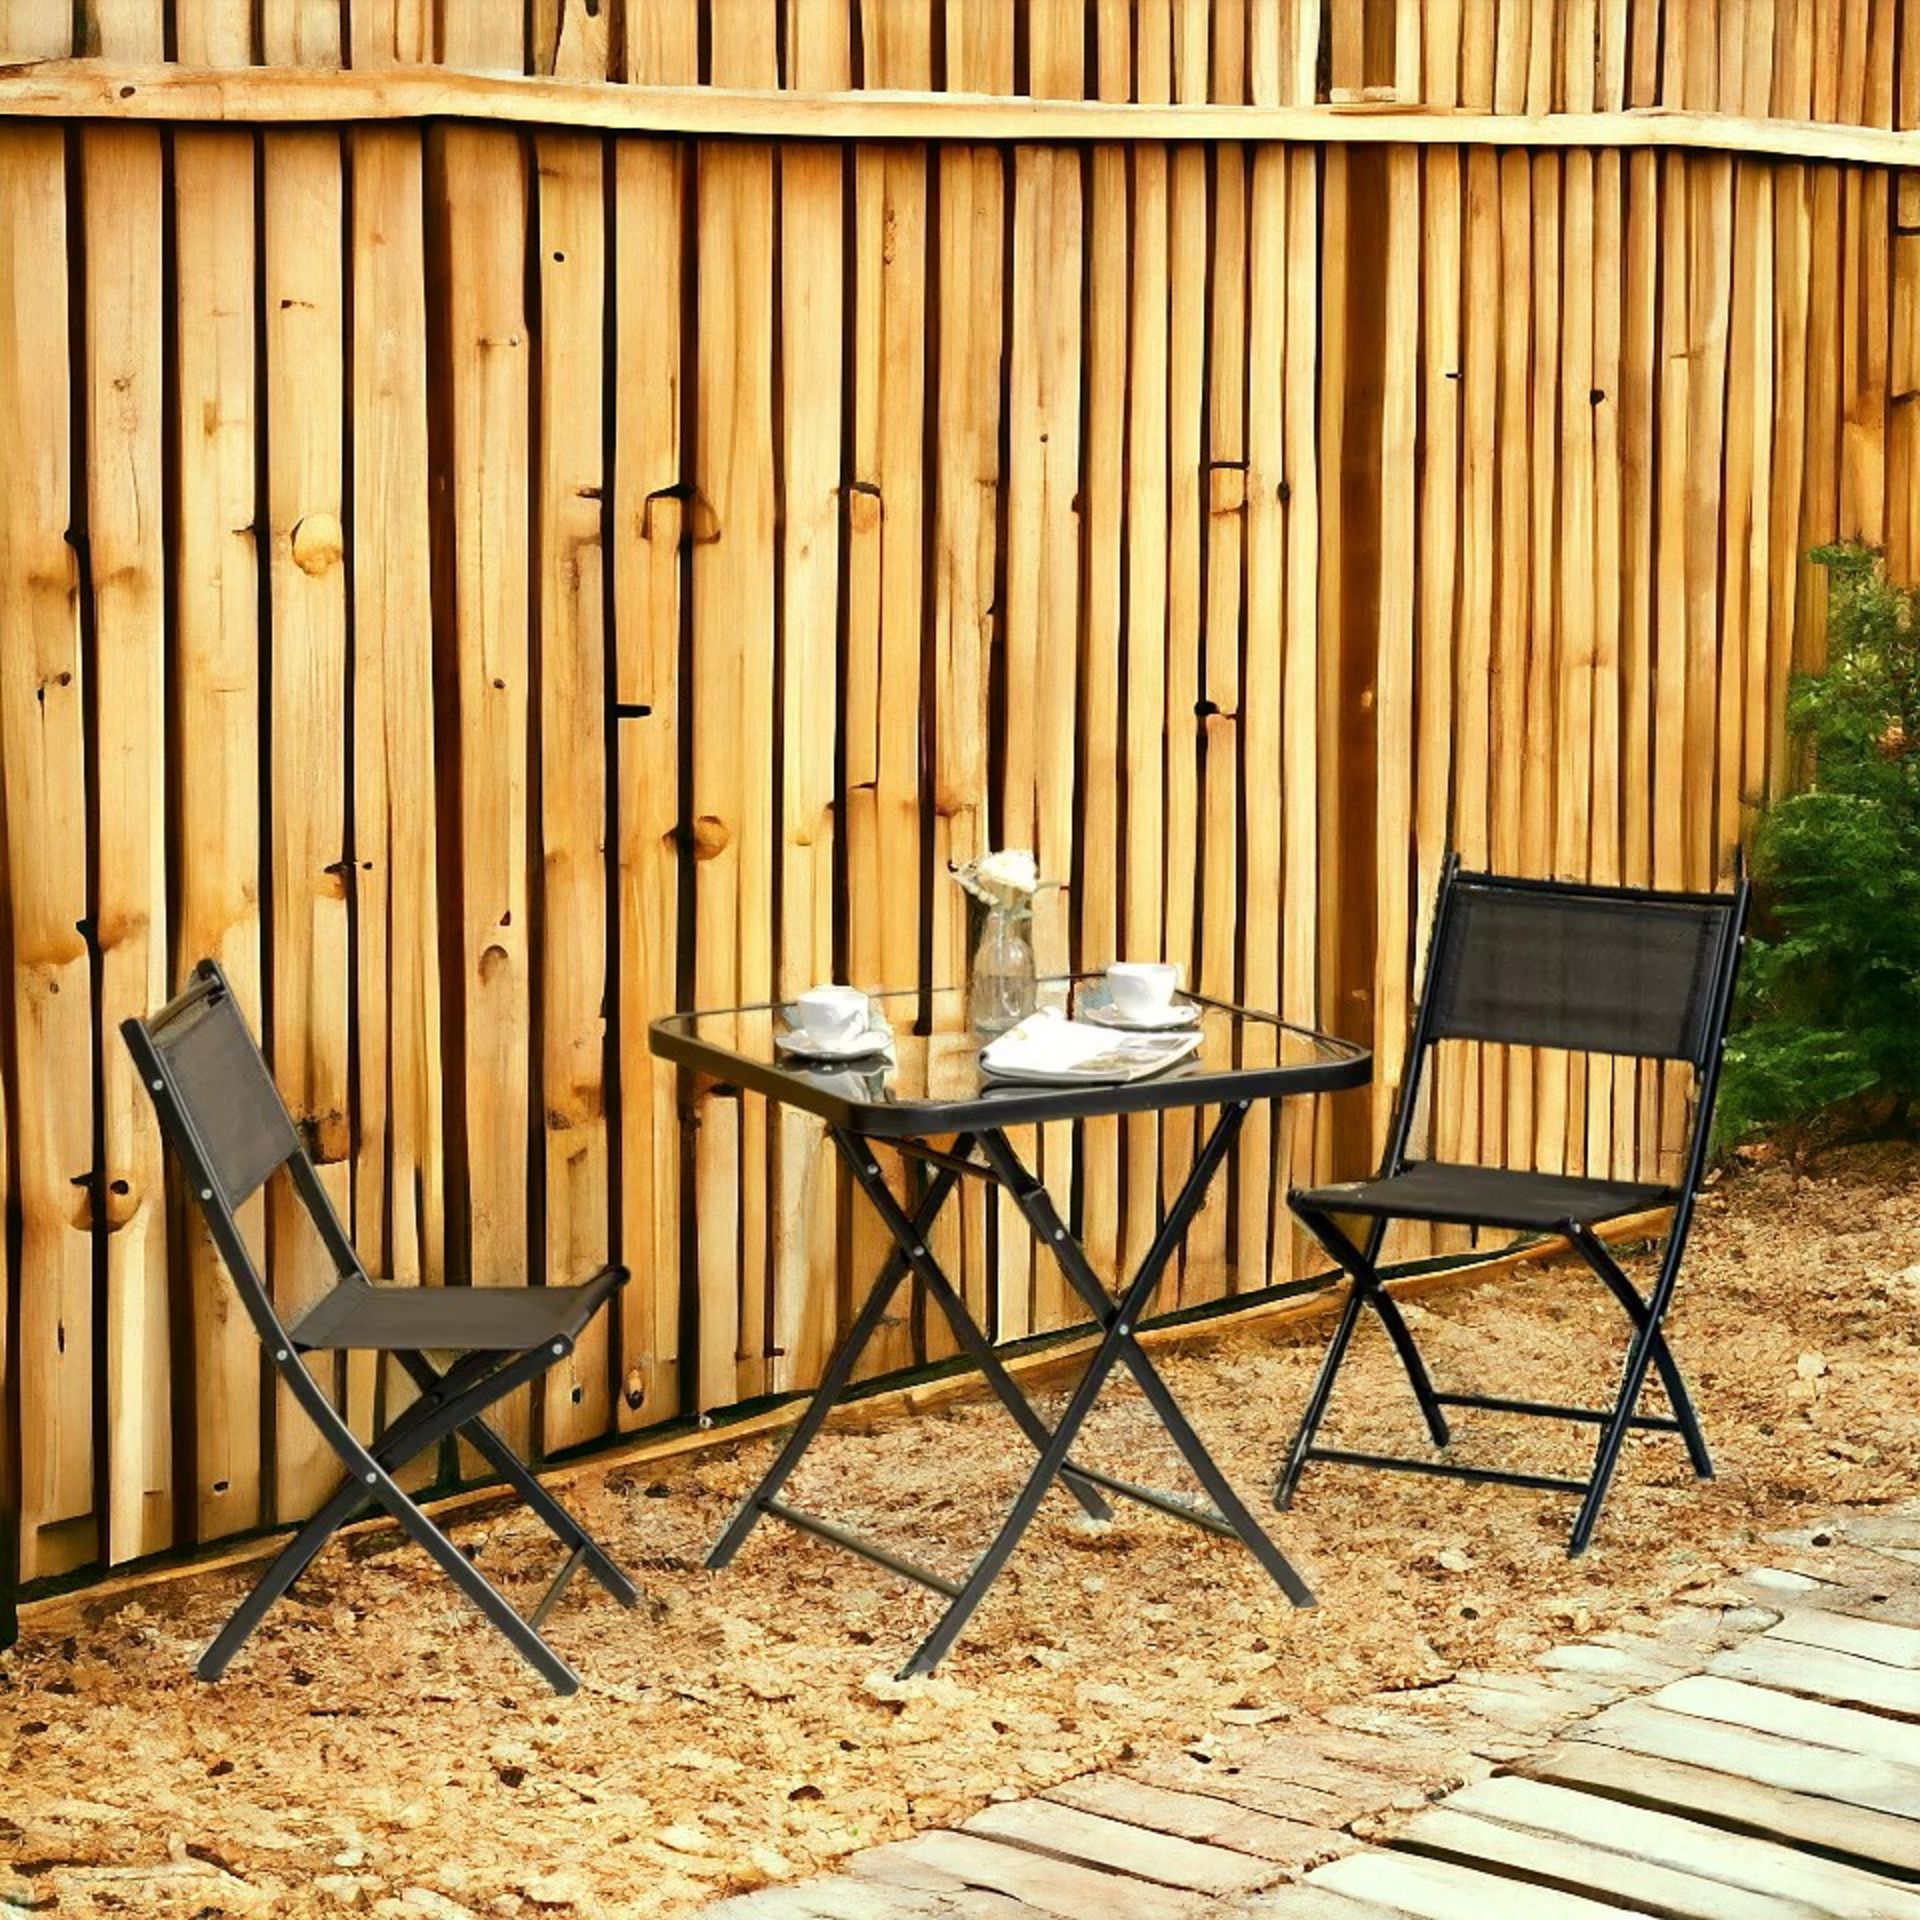 FREE DELIVERY - BRAND NEW 3PCS GARDEN BISTRO SET FOLDING TABLE AND 2 CHAIRS OUTDOOR FURNITURE